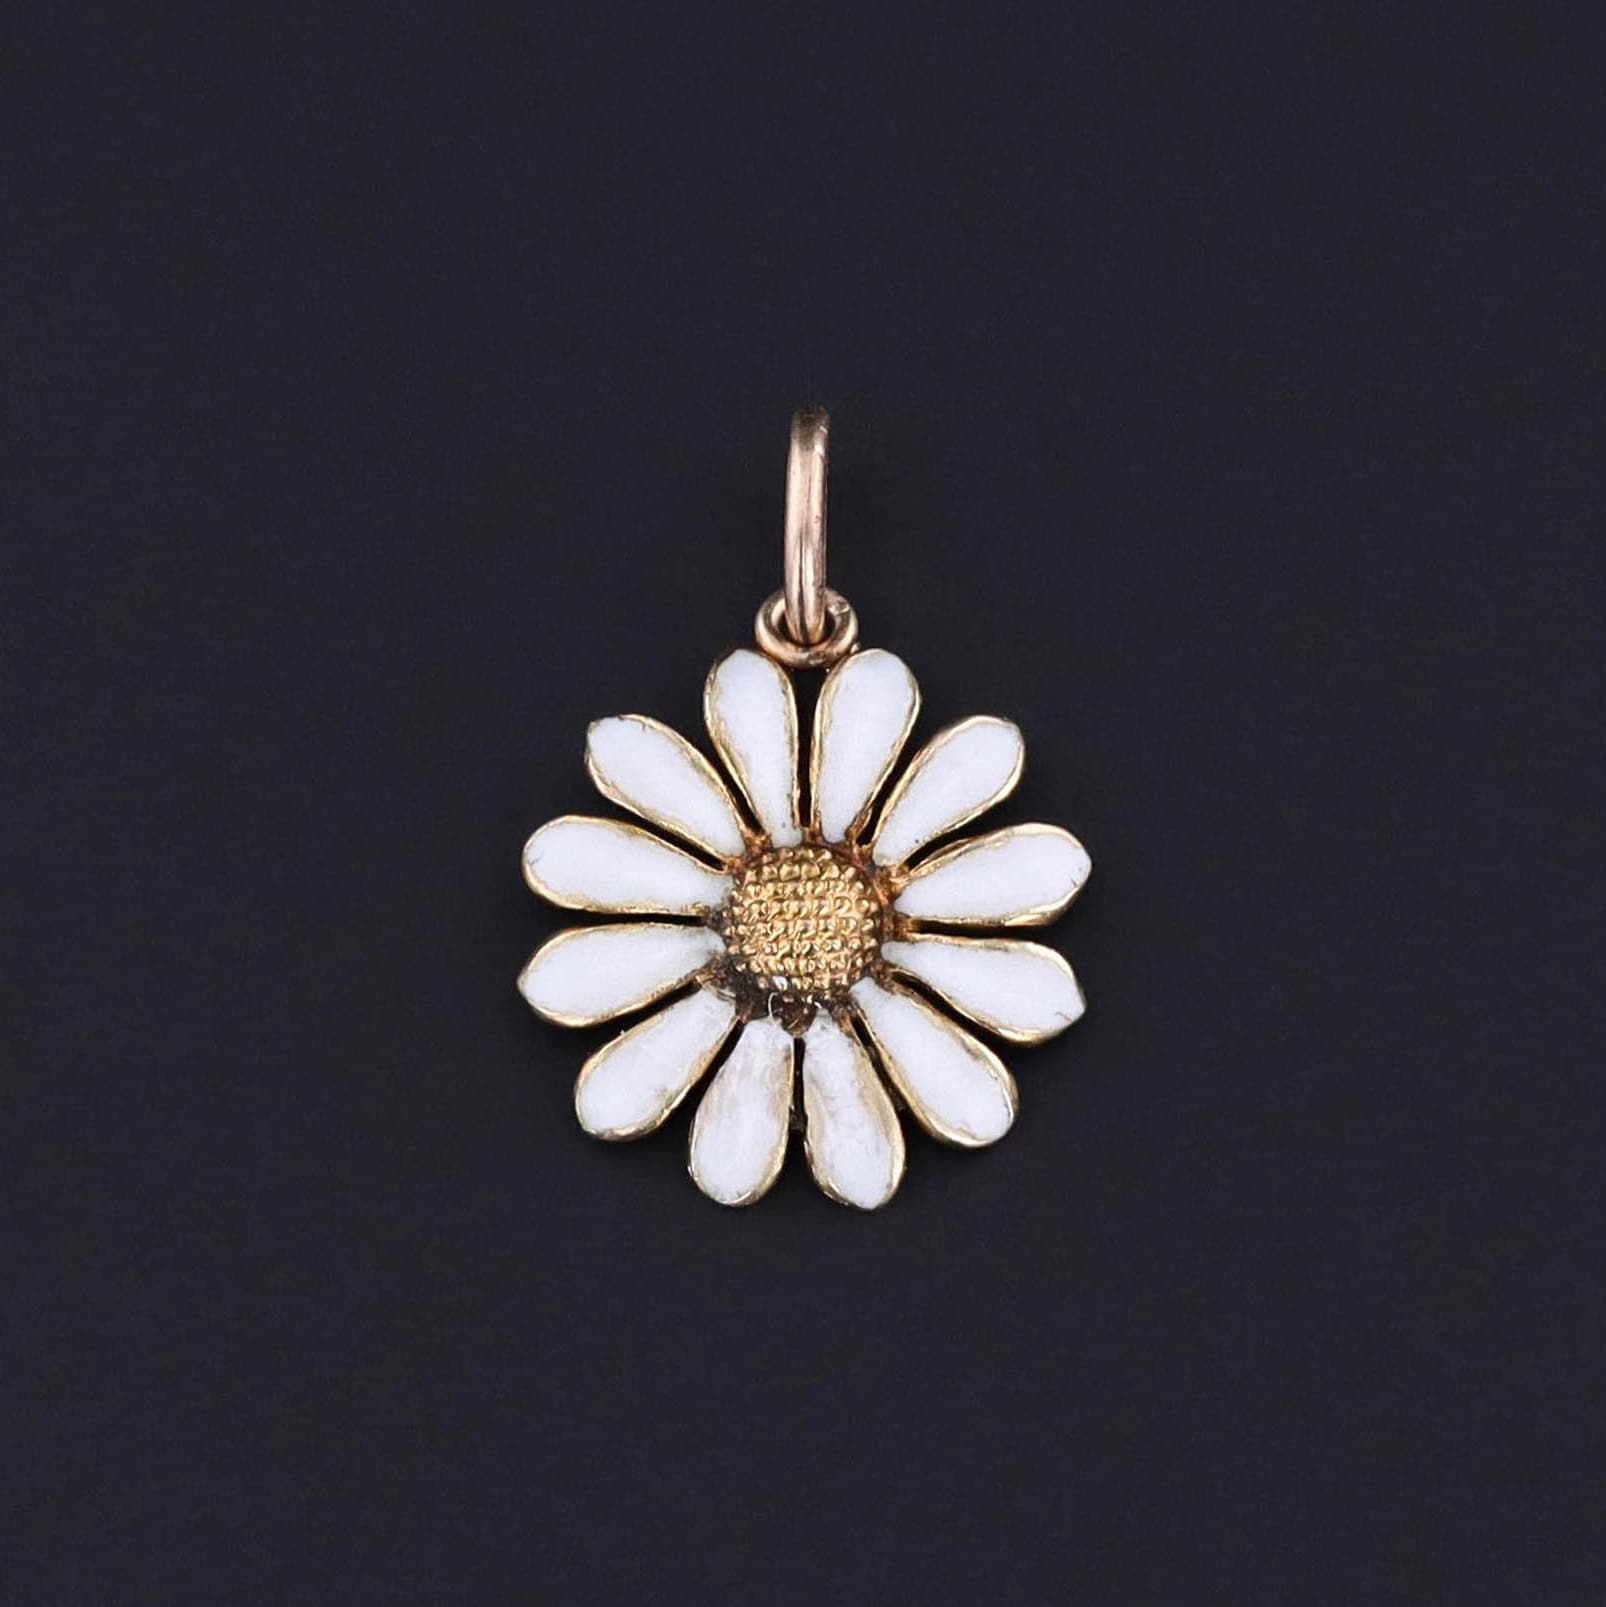 An antique white enamel daisy charm of 14k gold. The piece was originally a pin from the early 1900s. Perfect for any charm bracelet or charm necklace. It would also look great won by itself on a simple chain. A great gift for a flower lover.